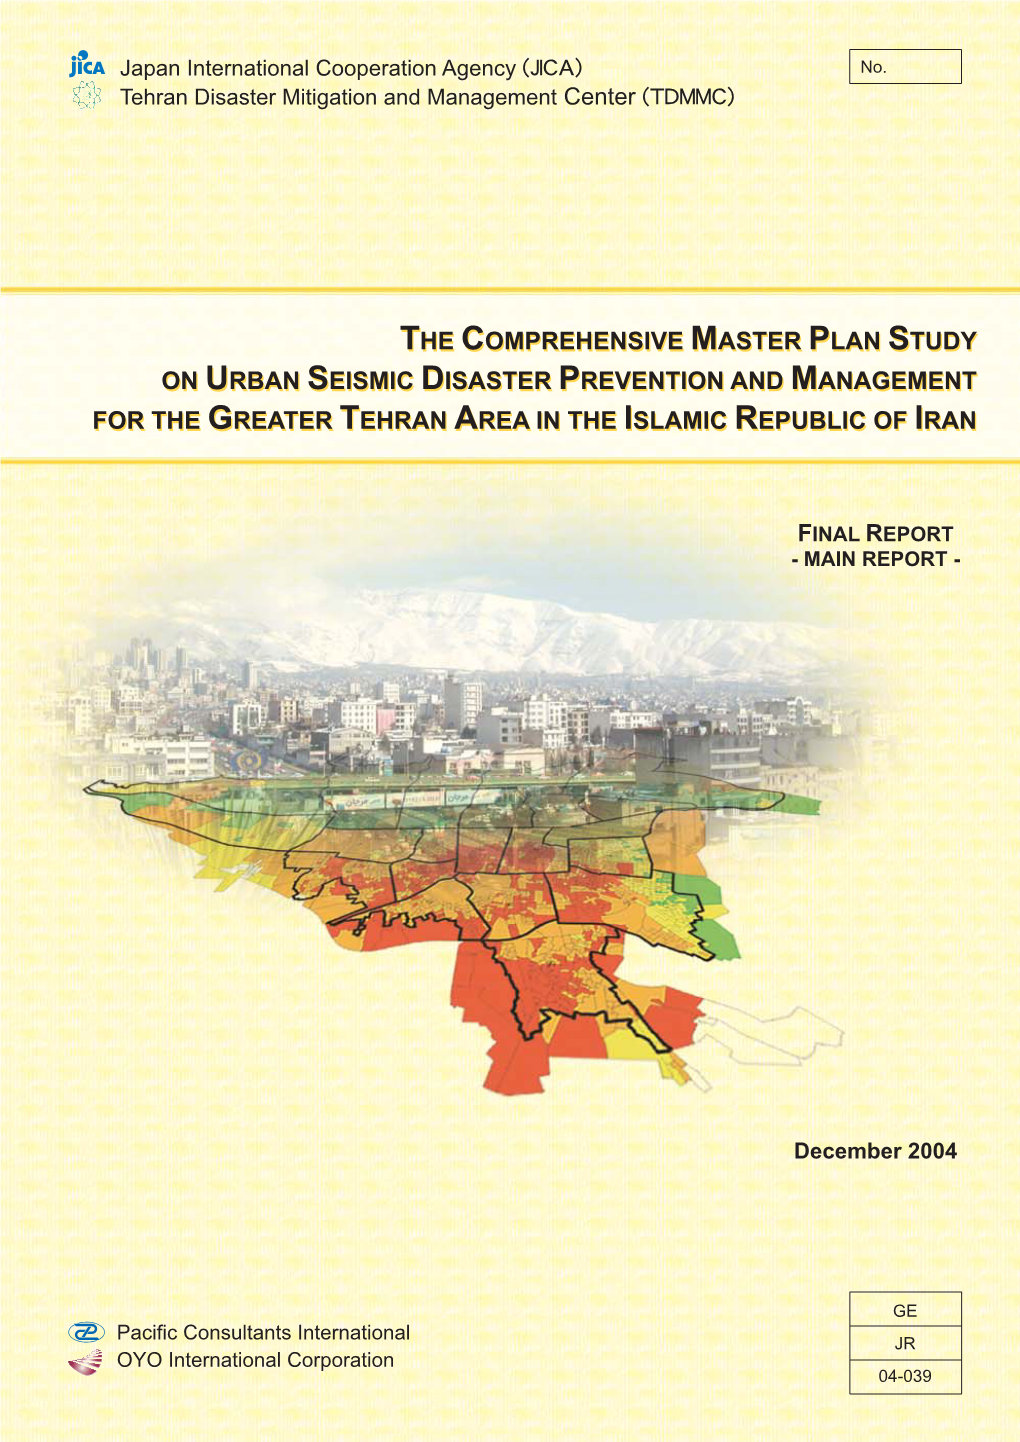 The Comprehensive Master Plan Study on Urban Seismic Disaster Prevention and Management for the Greater Tehran Area in the Islamic Republic of Iran